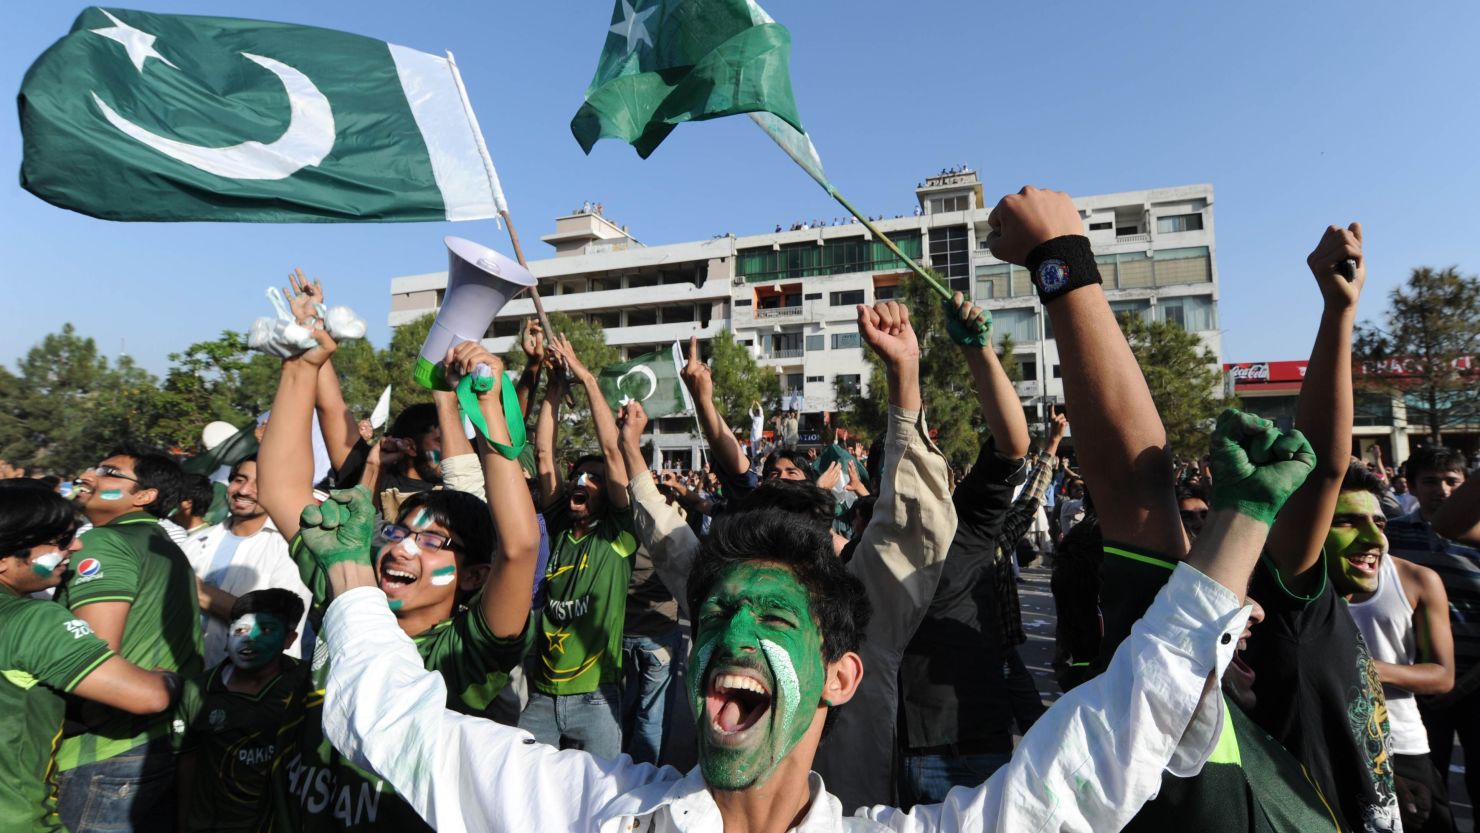 Pakistan's cricketers brought joy to their supporters by defeating India in the Twenty20 game in Bangalore, India.